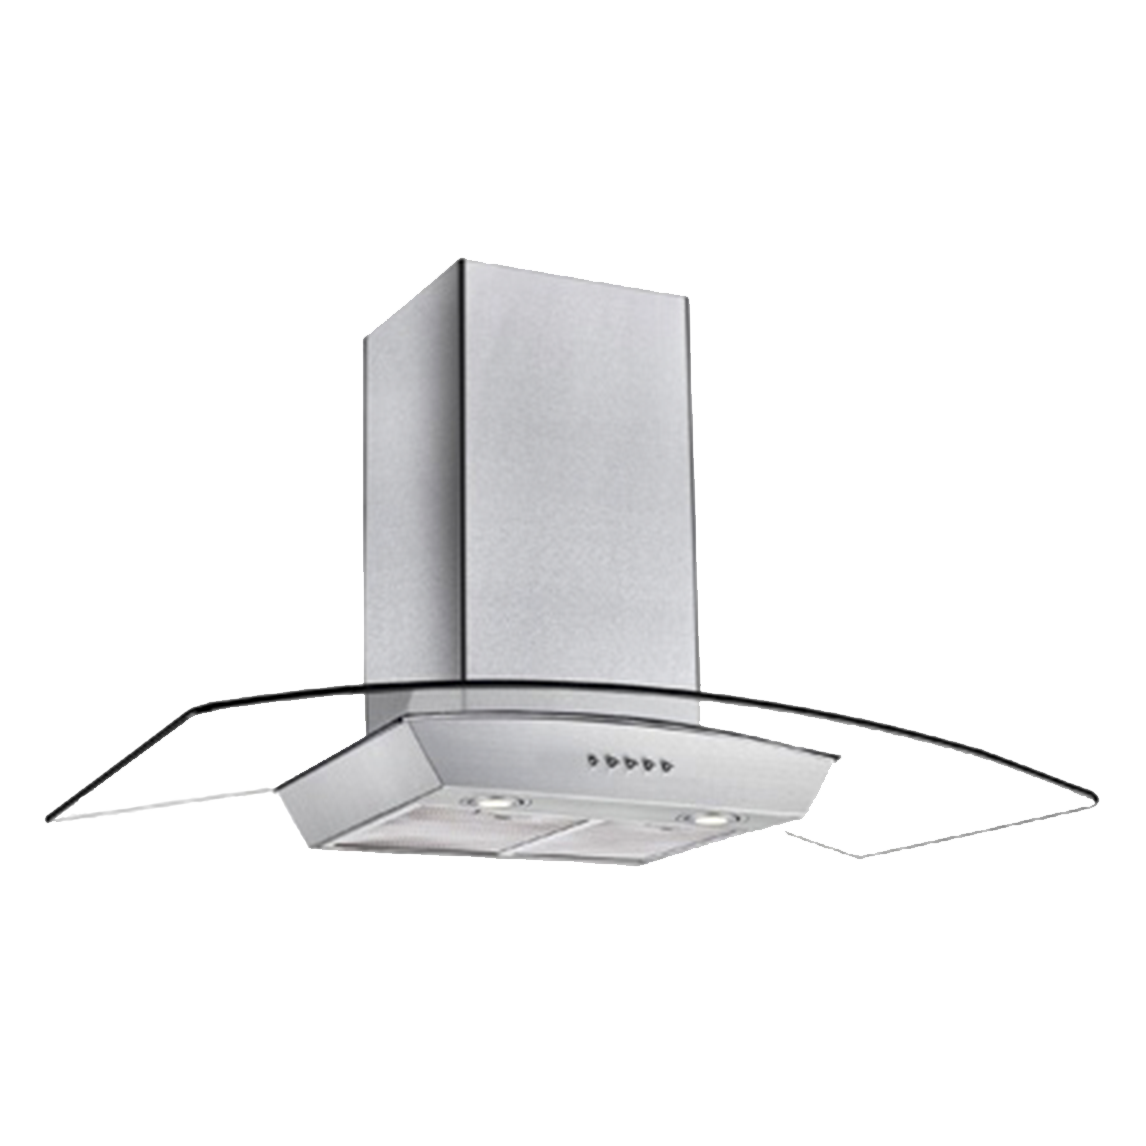 Premium 36'' 400 CFM Range Hood. Stainless Steel. 3-Speed with Timer Two Filters